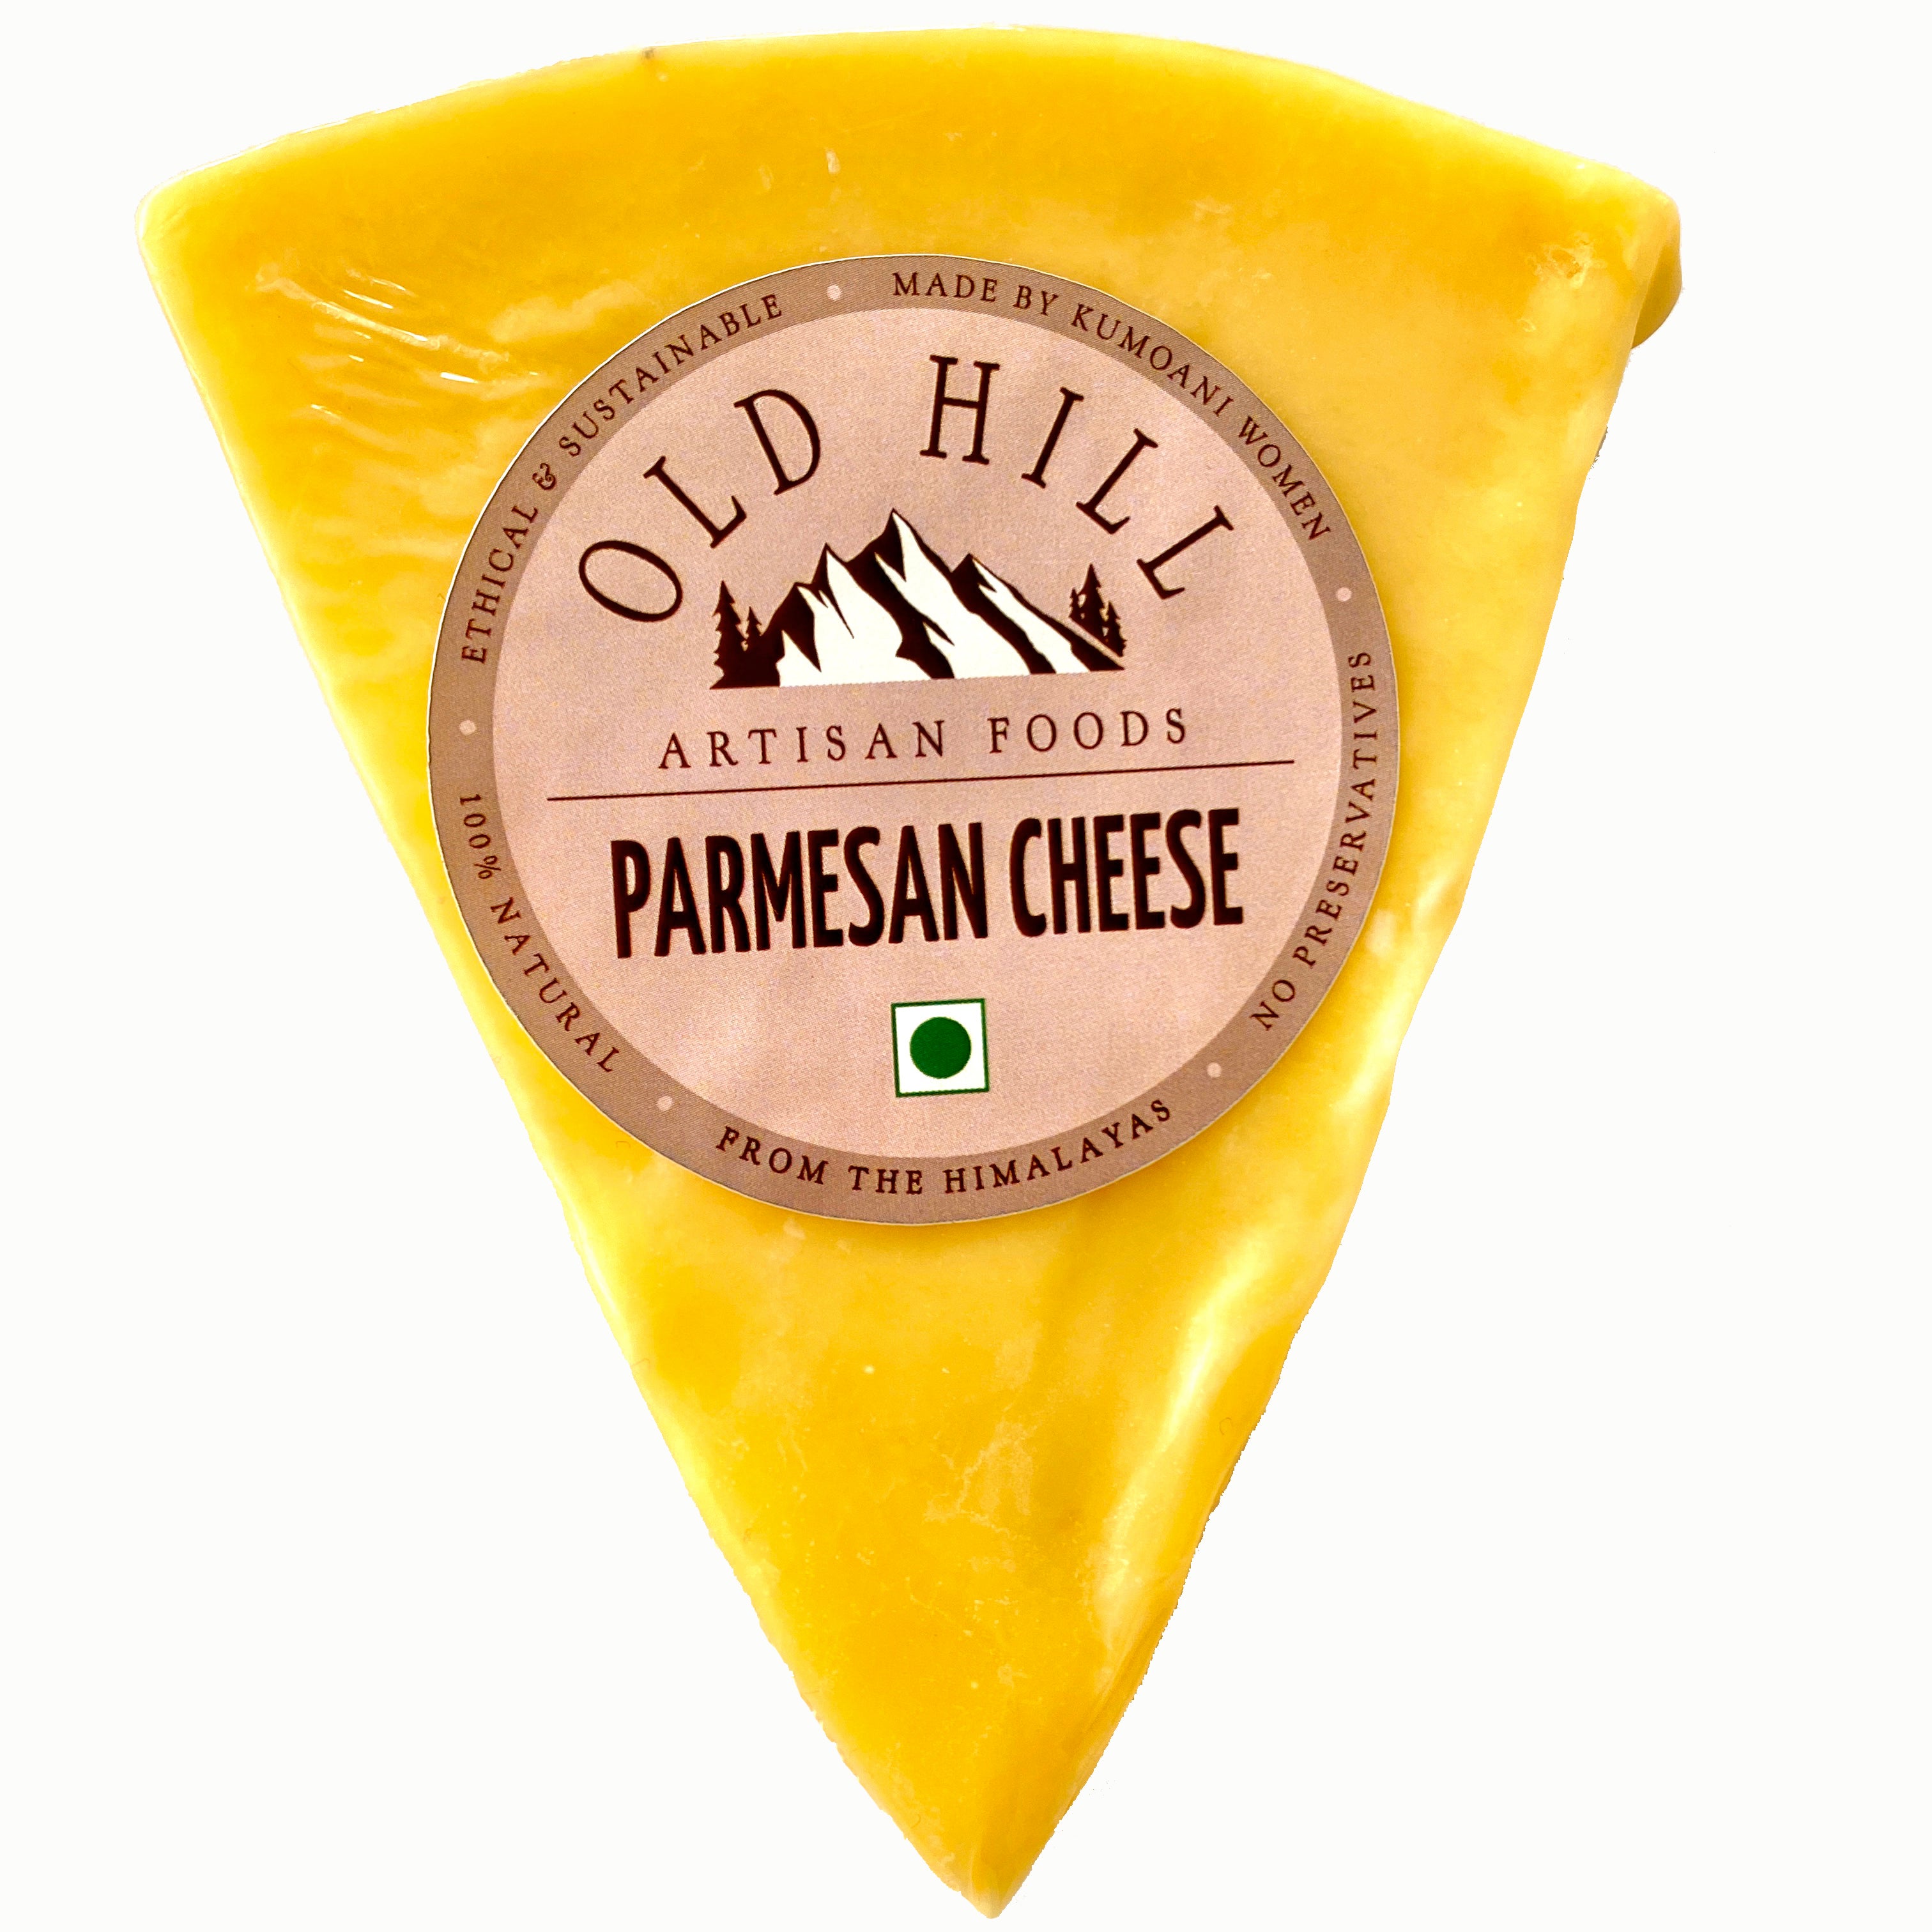 CHEESE - PARMESAN (Old Hill)